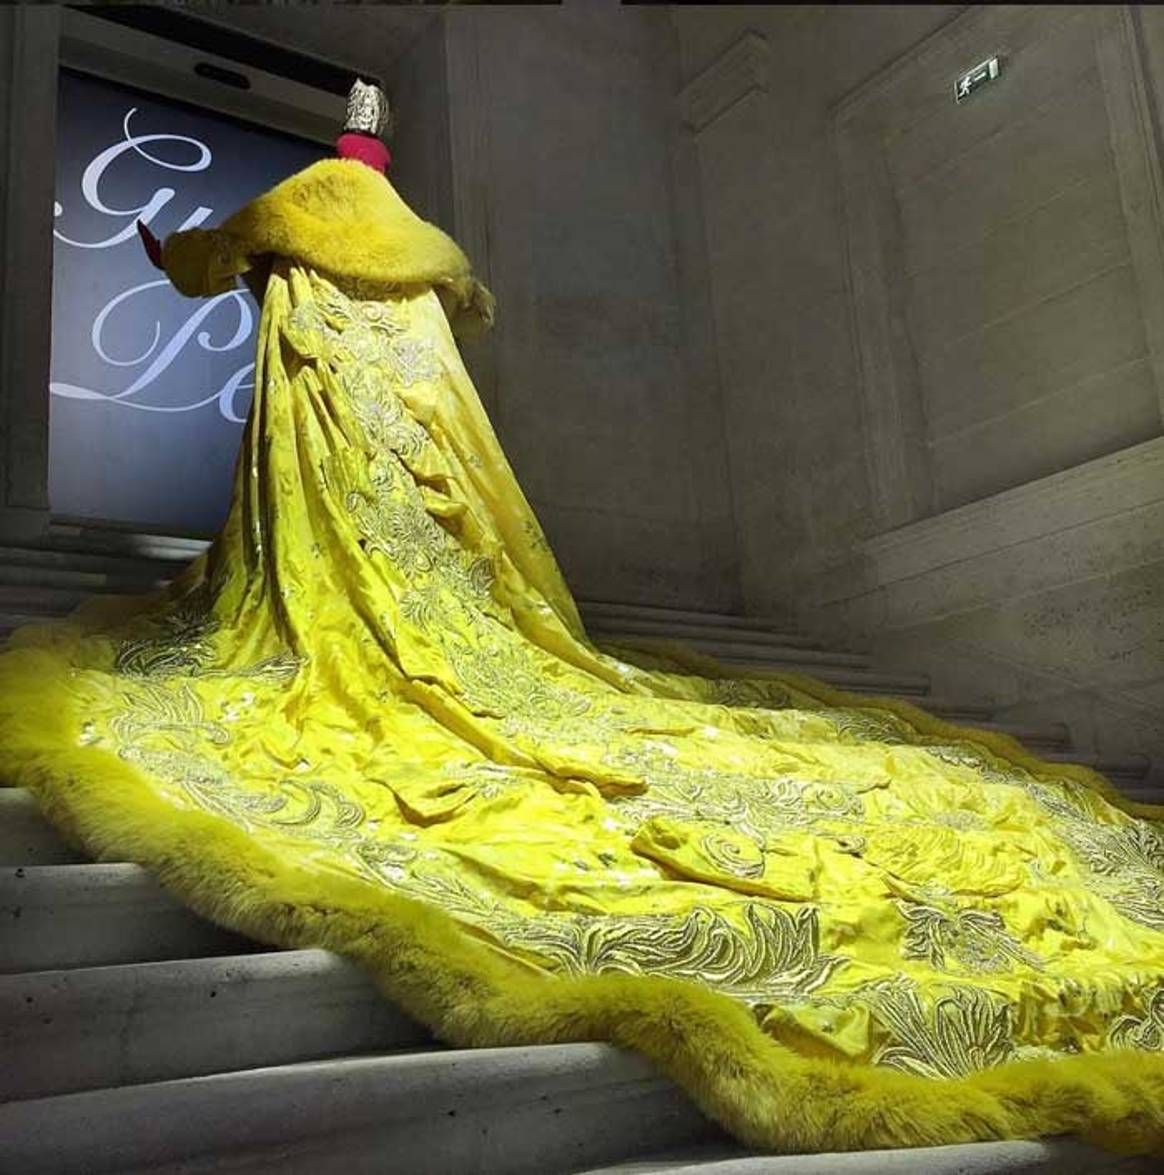 The rise of Guo Pei